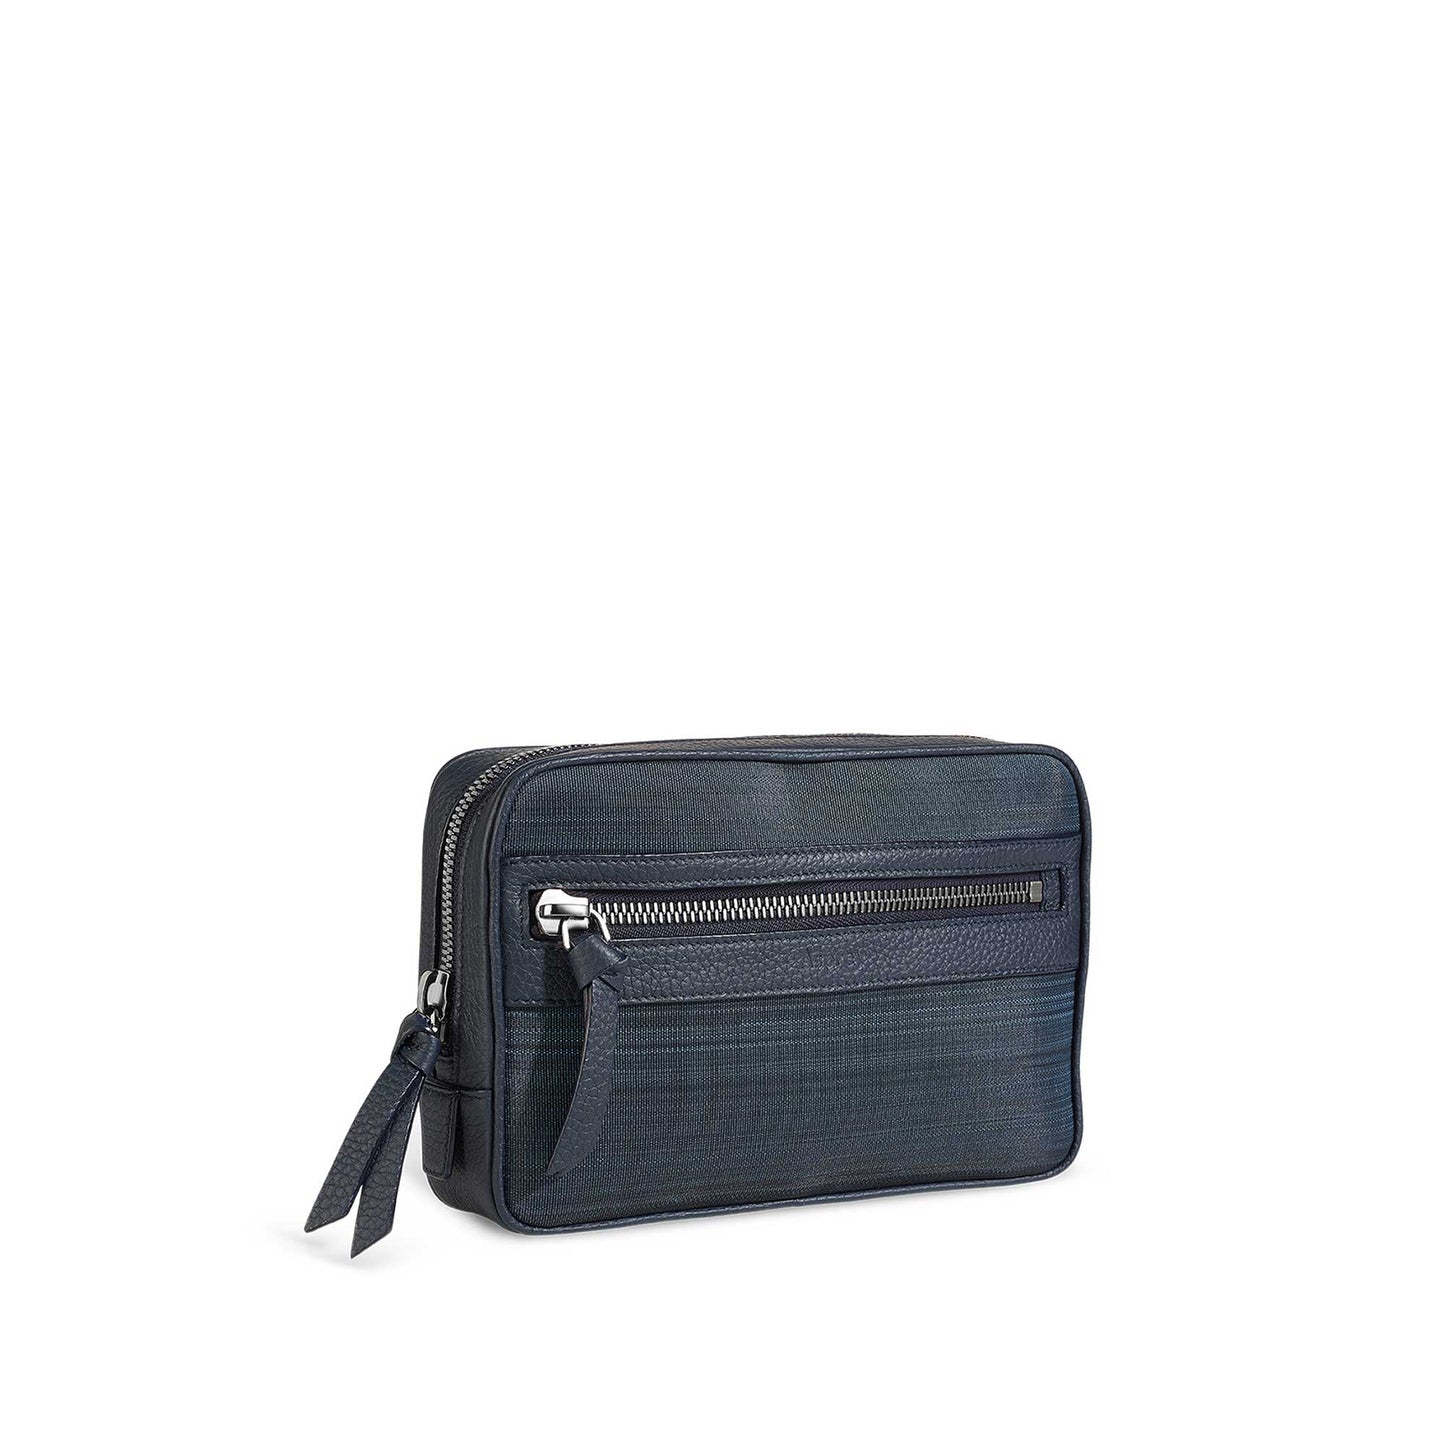 GMT Clutch in Marine Horsehair & Soft Grain Leather